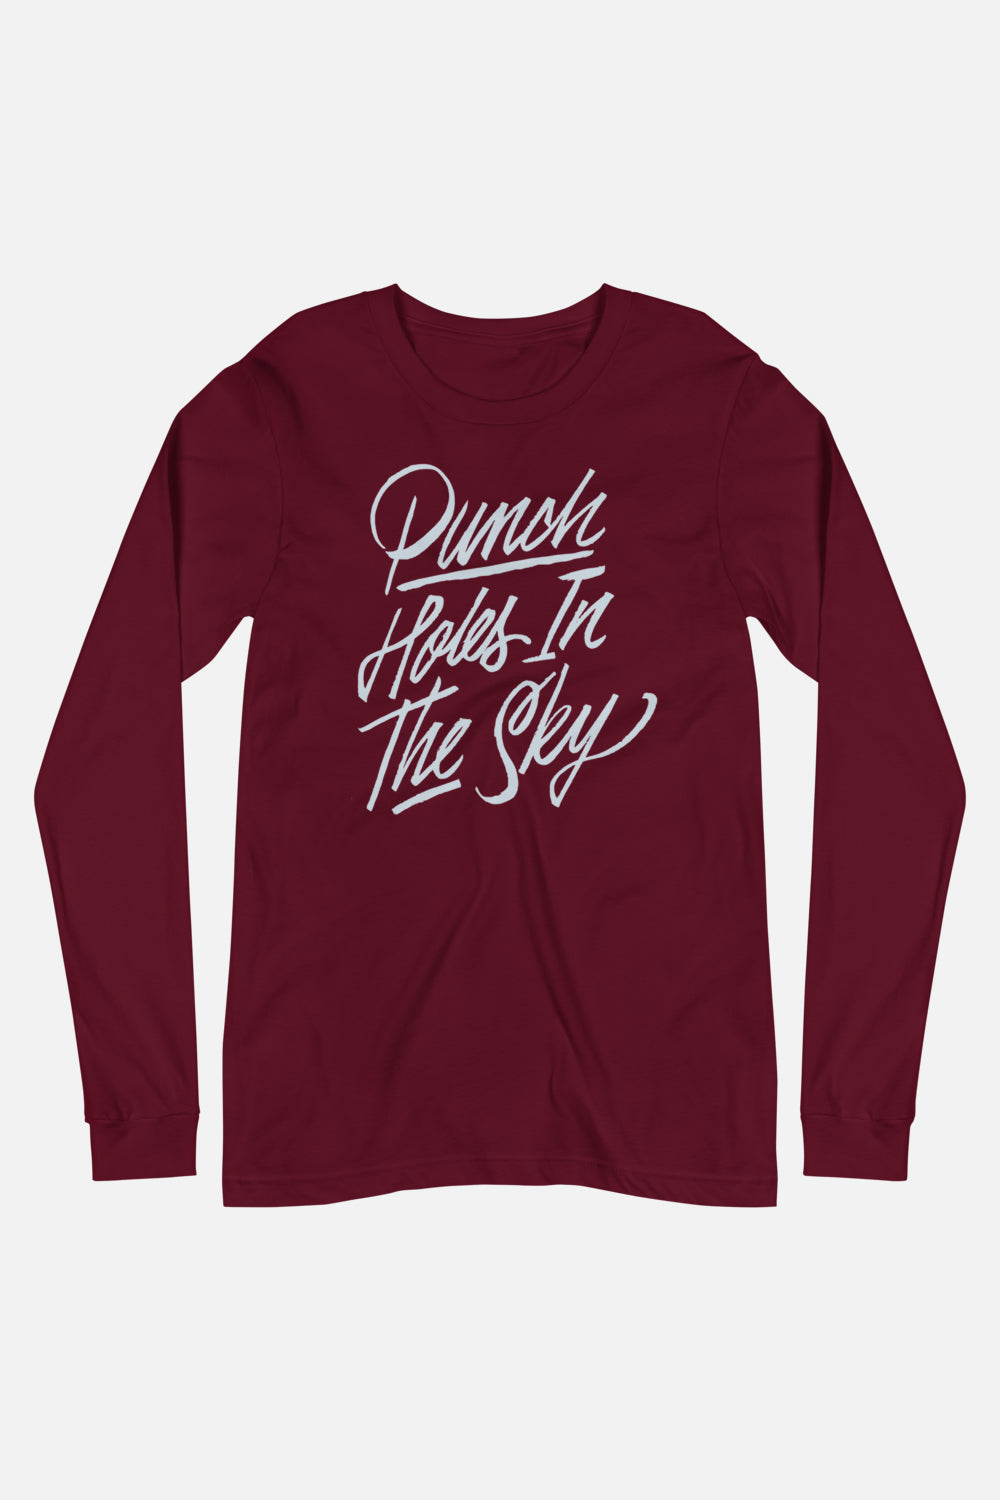 Punch Holes in the Sky Unisex Long Sleeve Tee